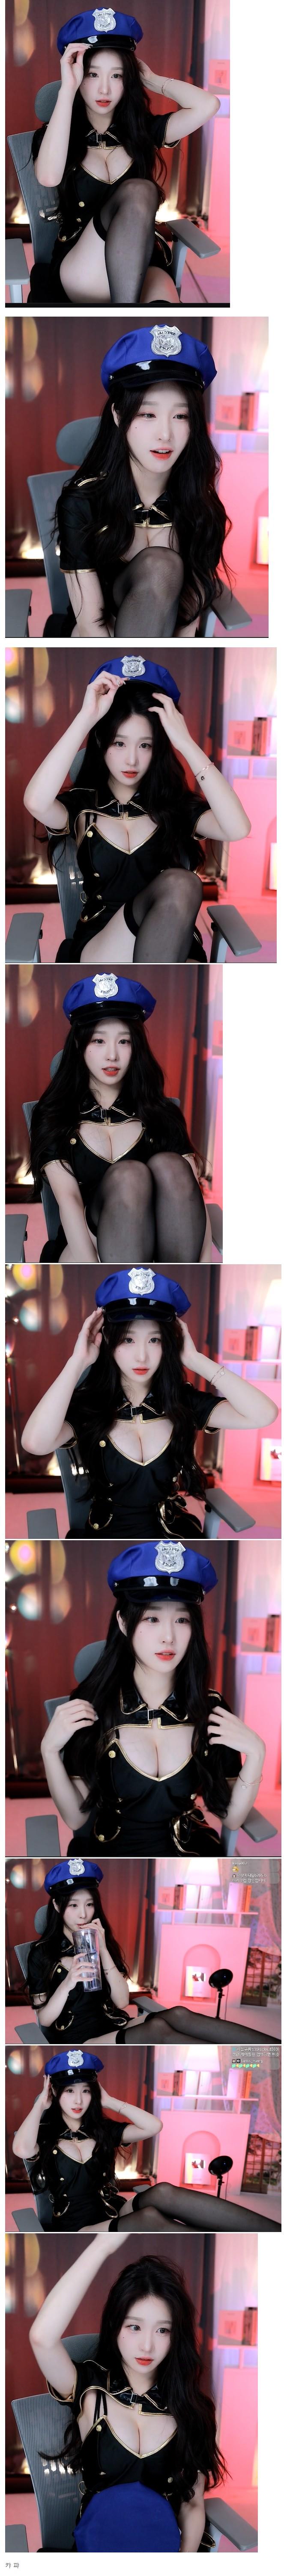 A bold mid-air opening with a female police cap